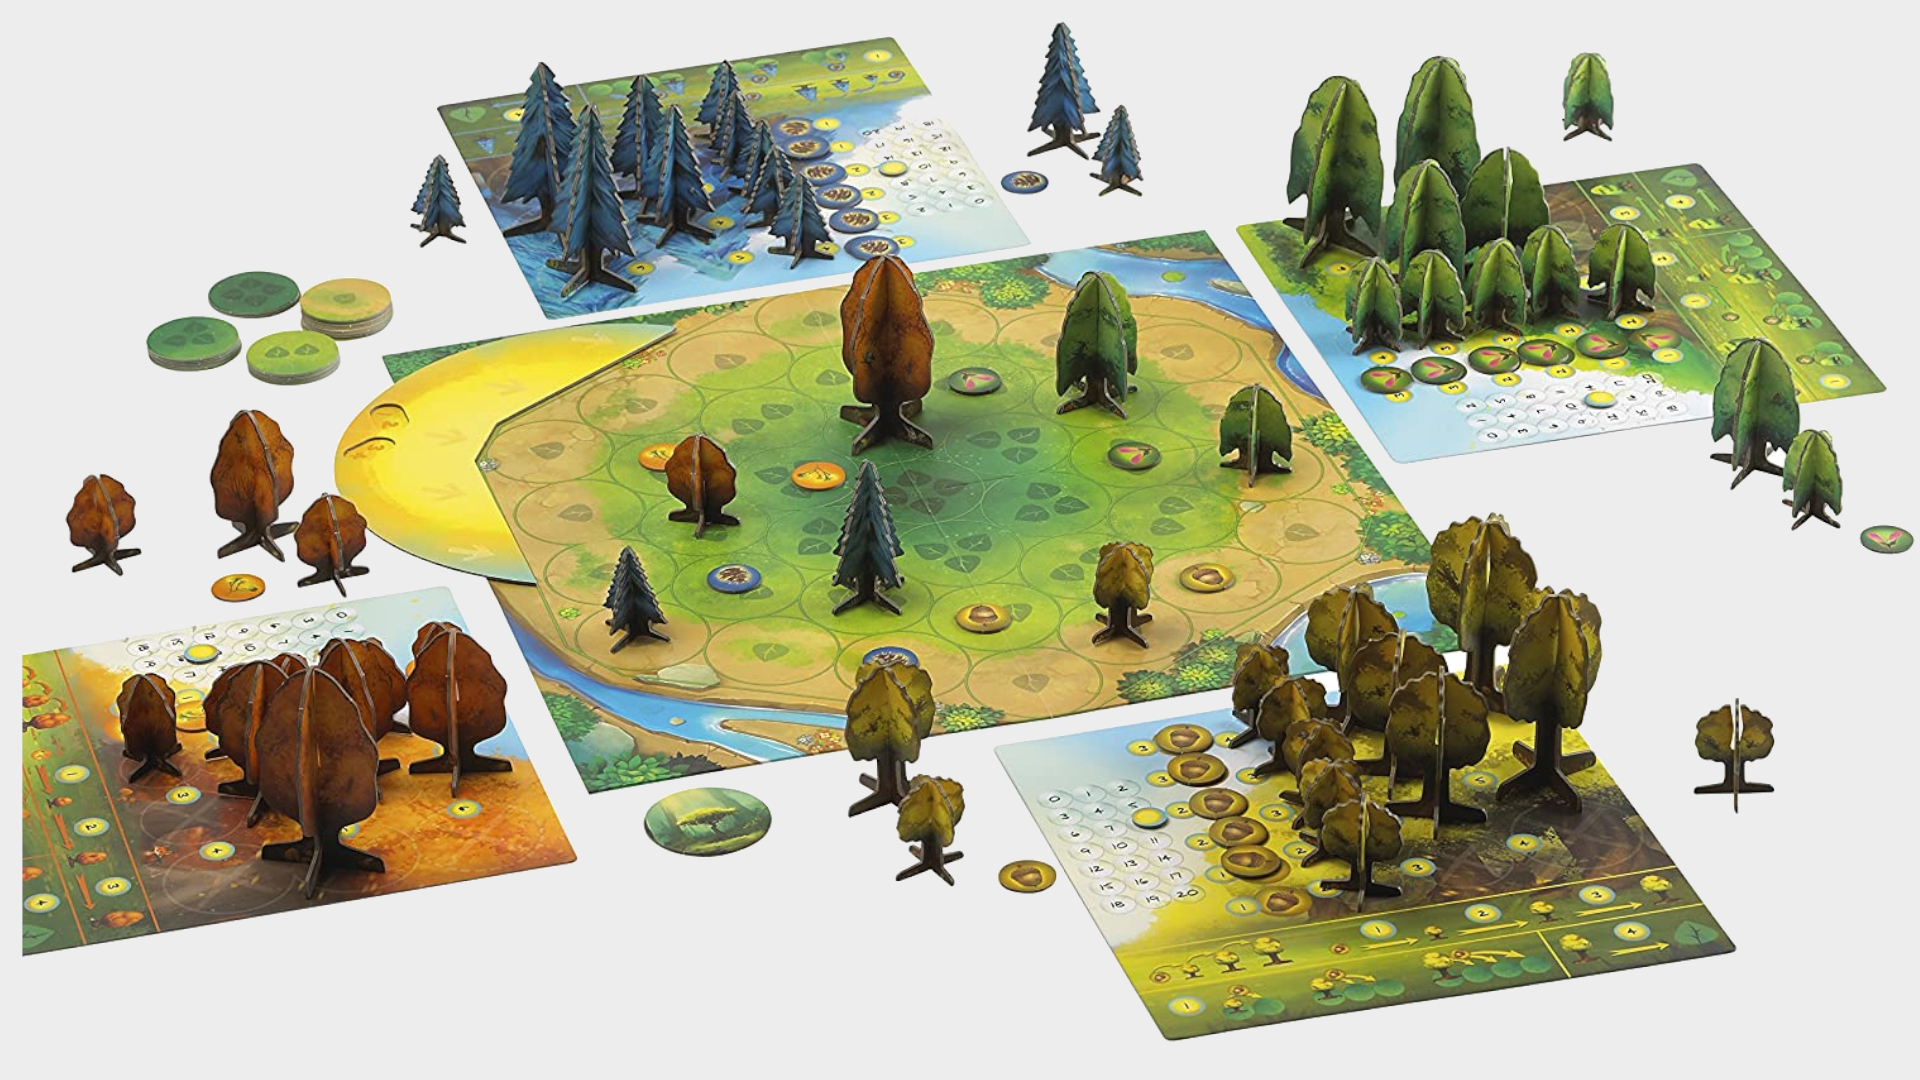 Photosynthesis board game